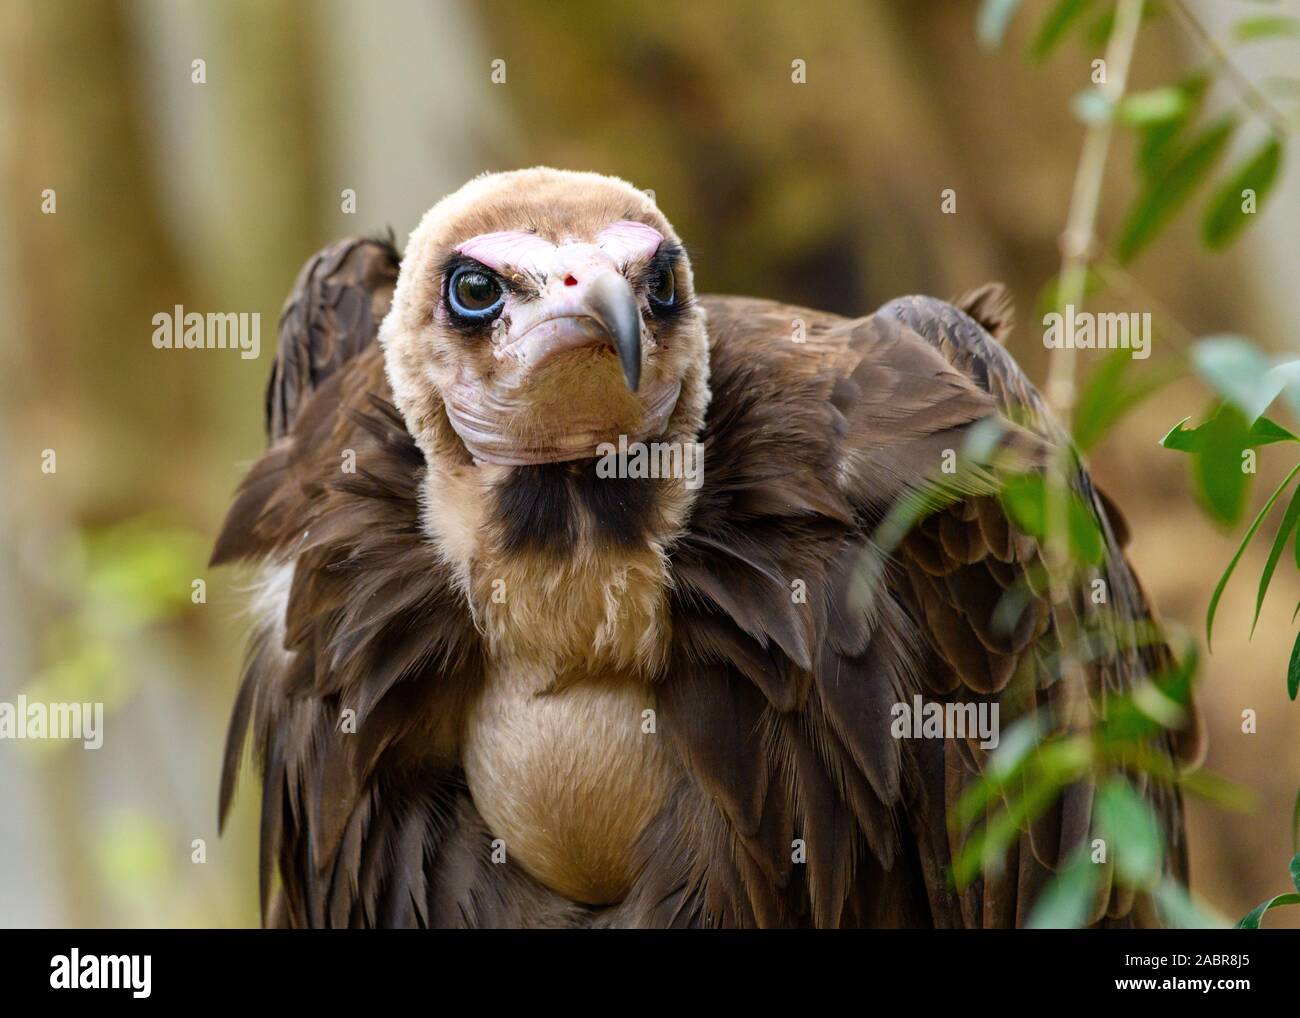 Hooded Vulture(Necrosyrtes monachus) close-up detailed view of face Stock Photo